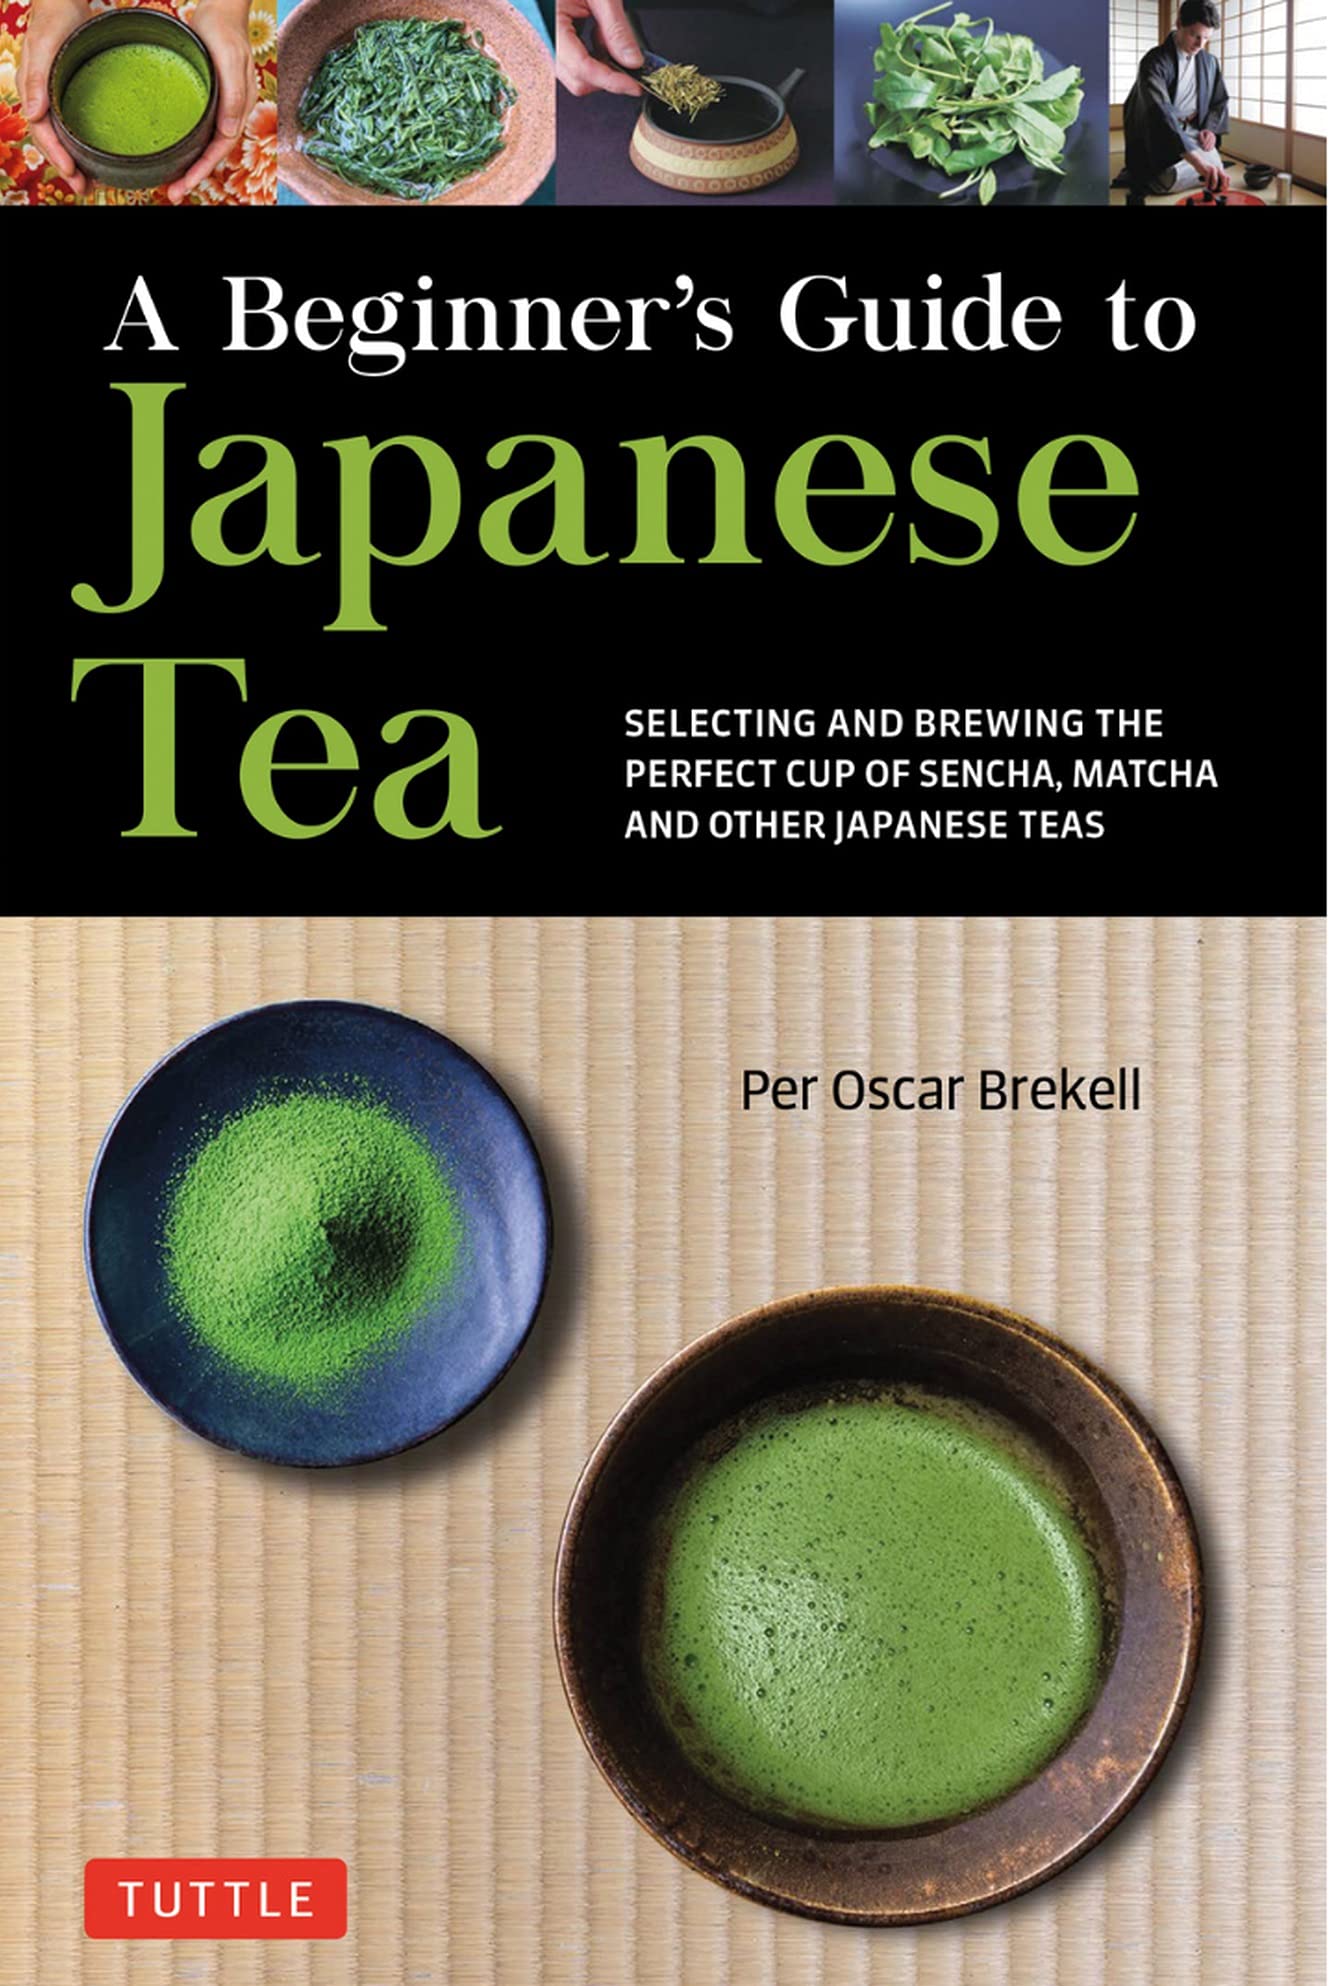 A Beginner's Guide to Japanese Tea: Selecting and Brewing the Perfect Cup of Sencha, Matcha, and Other Japanese Teas (Per Oscar Brekell)